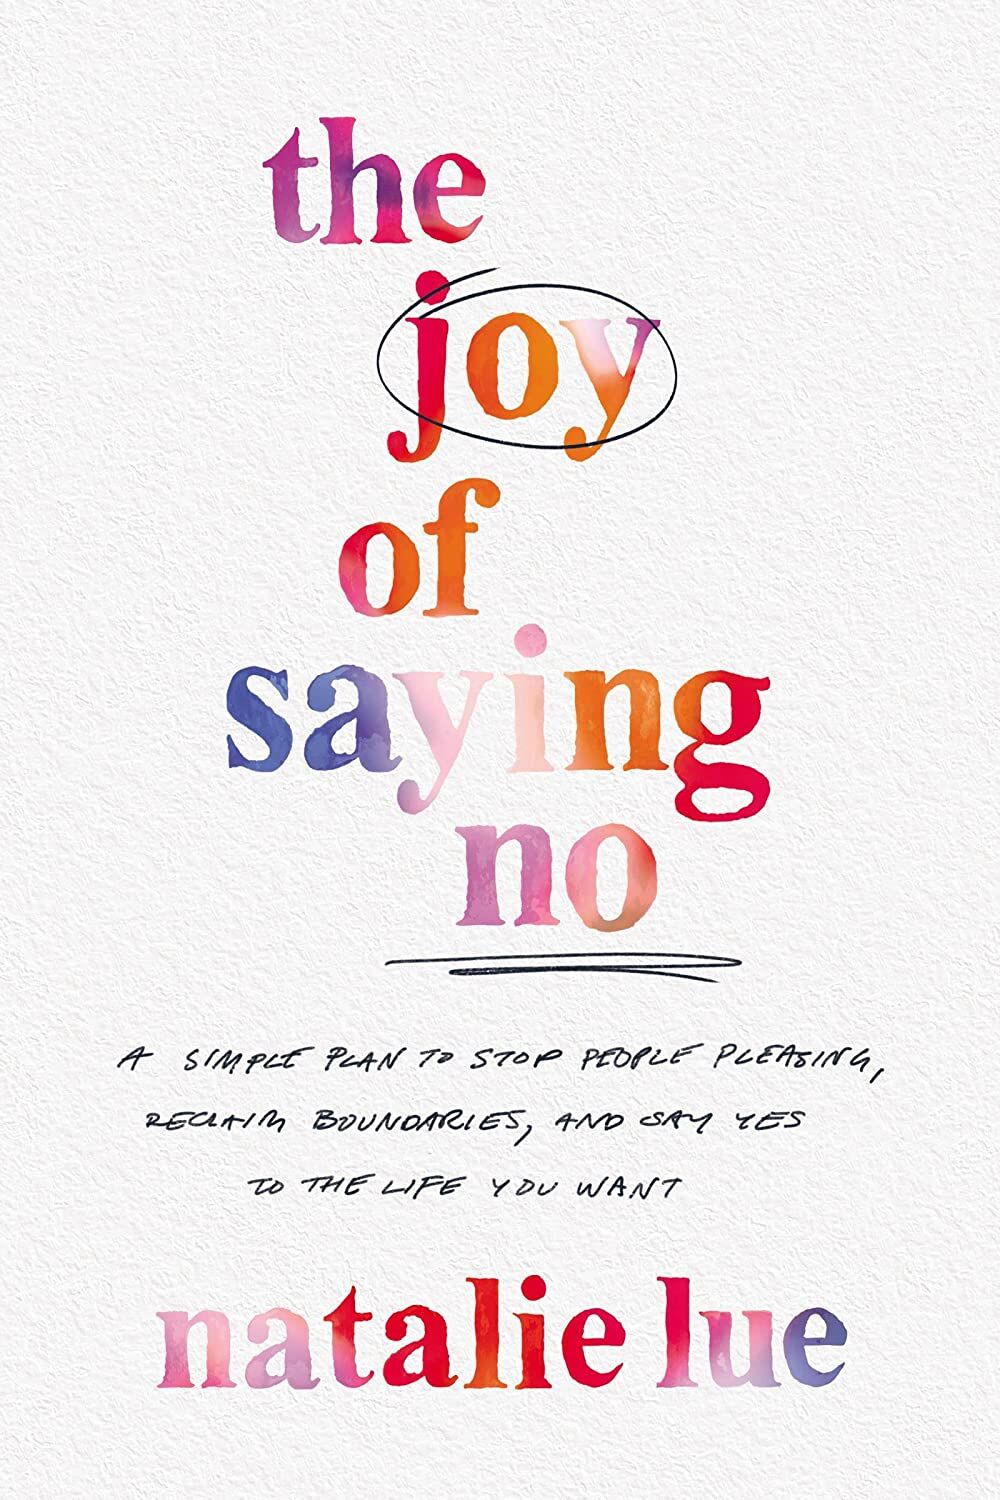 Cover of The Joy of Saying No: A Simple Plan to Stop People Pleasing, Reclaim Boundaries, and Say Yes to the Life You Want by Natalie Lue